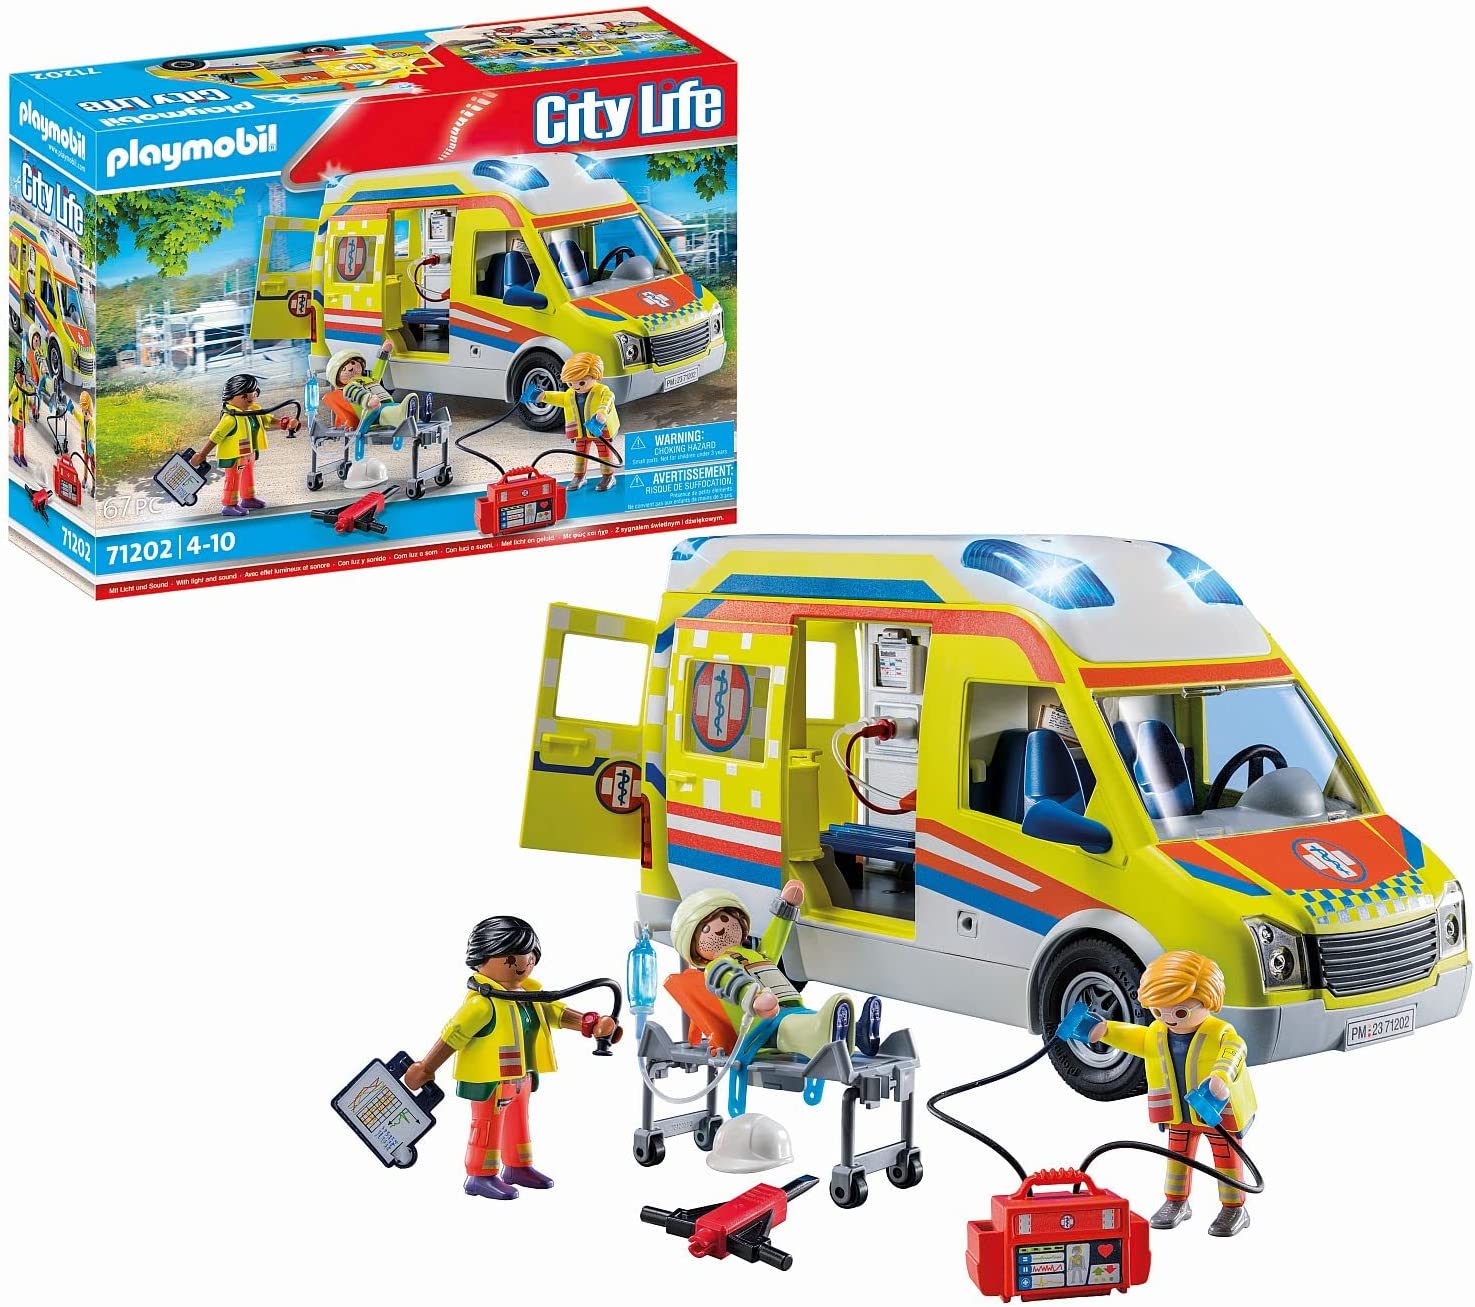 Playmobil City Life 71202 Ambulance with Light and Sound, Toy for Children from 4 years